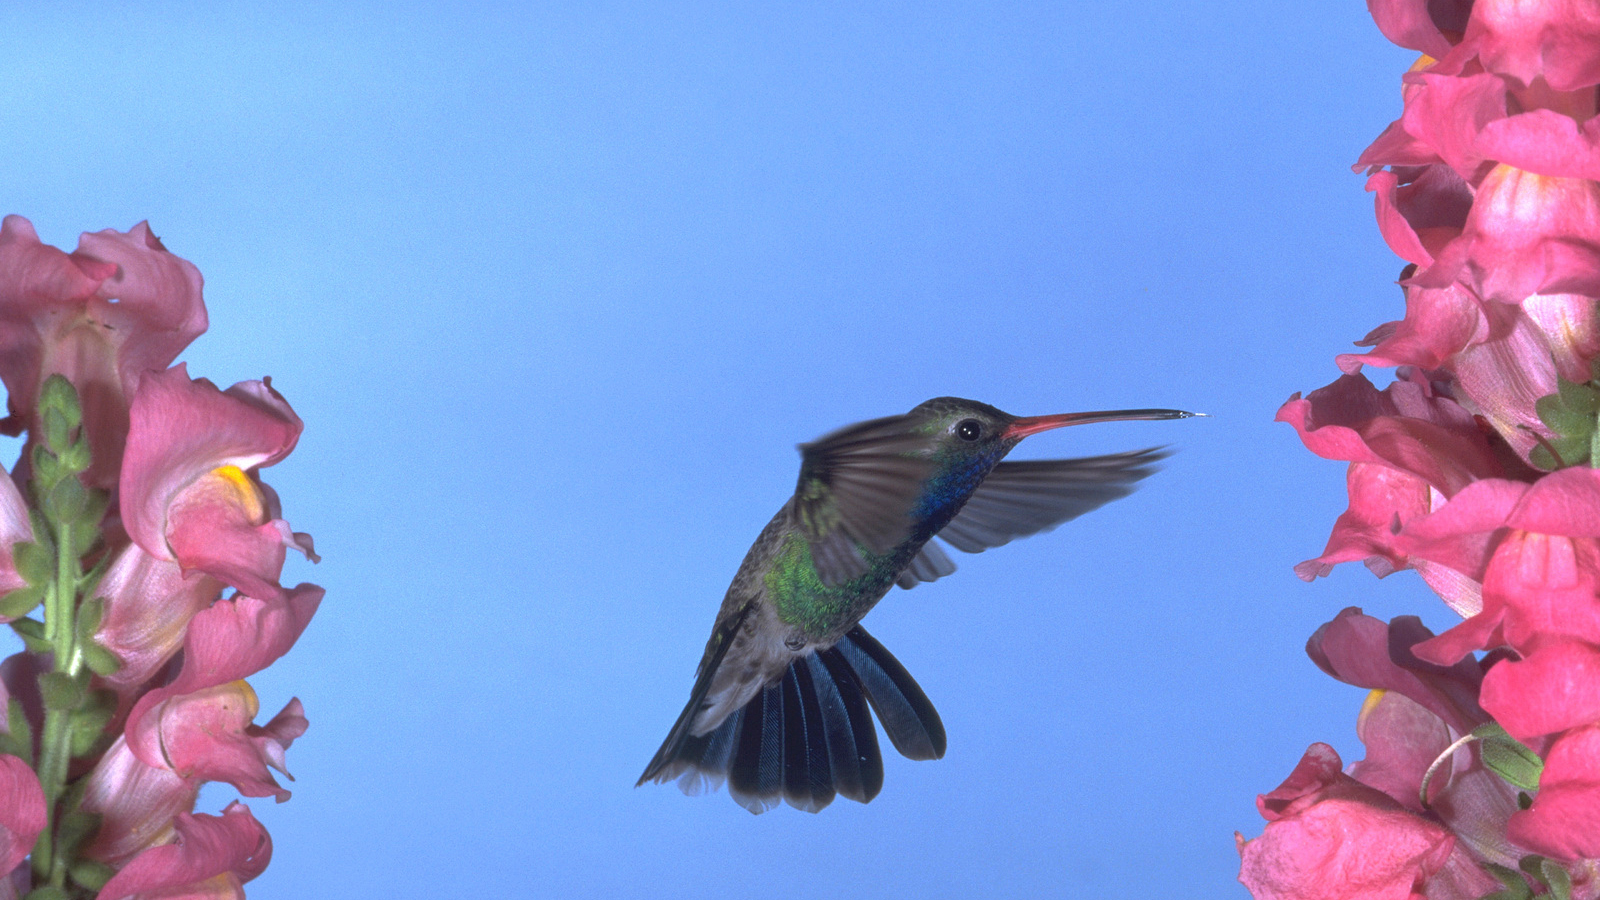 A broad-billed hummingbird—one of the species found in Patagonia-Sonoita Creek, in Madera Canyon, Arizona. Photo © Dick Dickenson